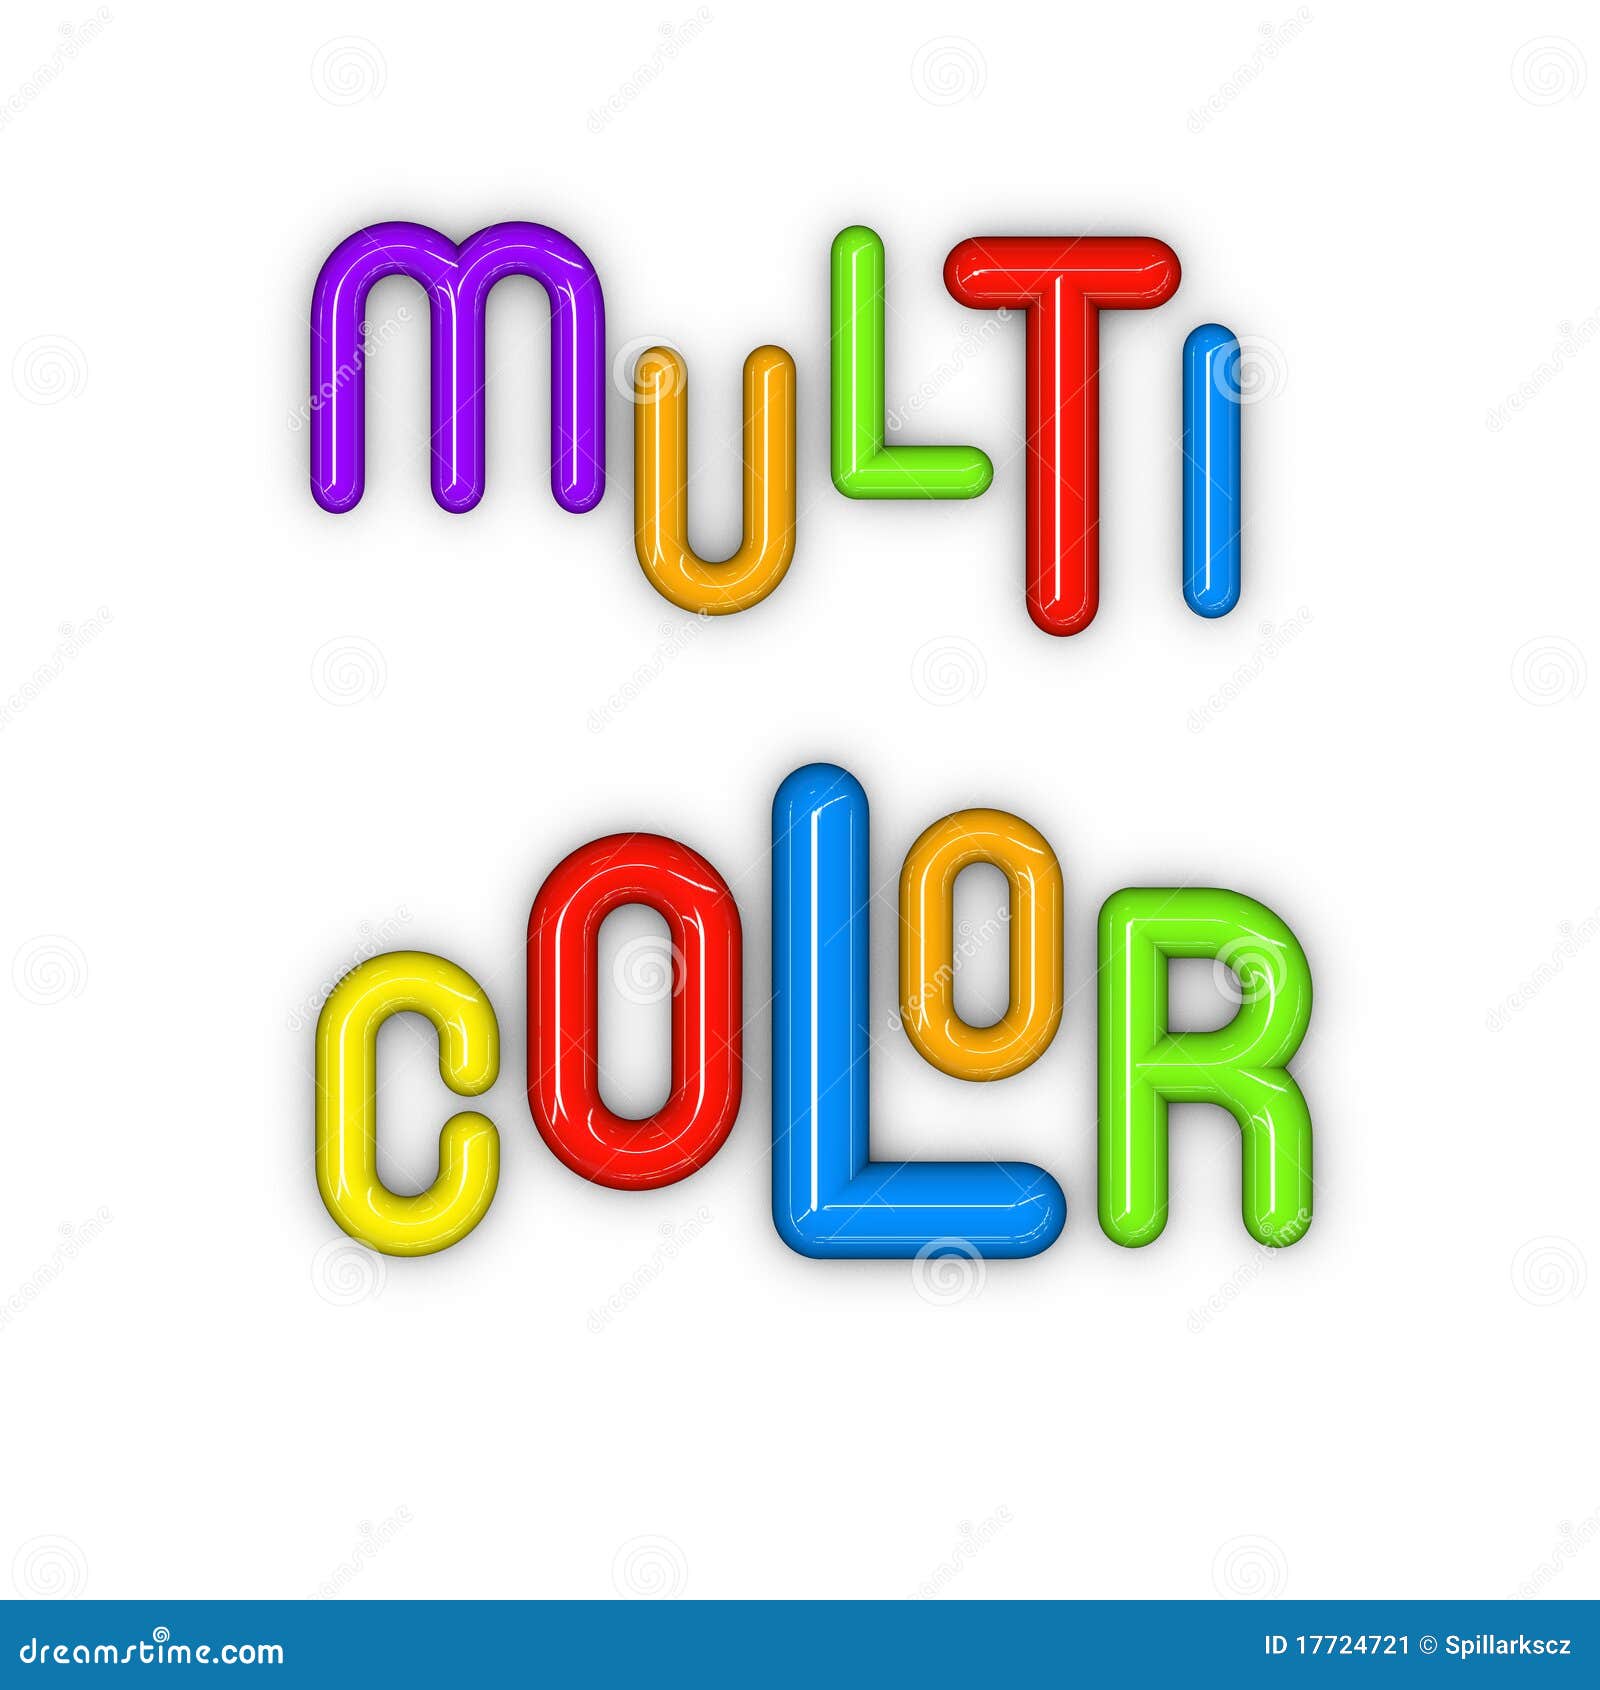 Multi Color In Glossy 3d Fonts Stock Image  Image 17724721